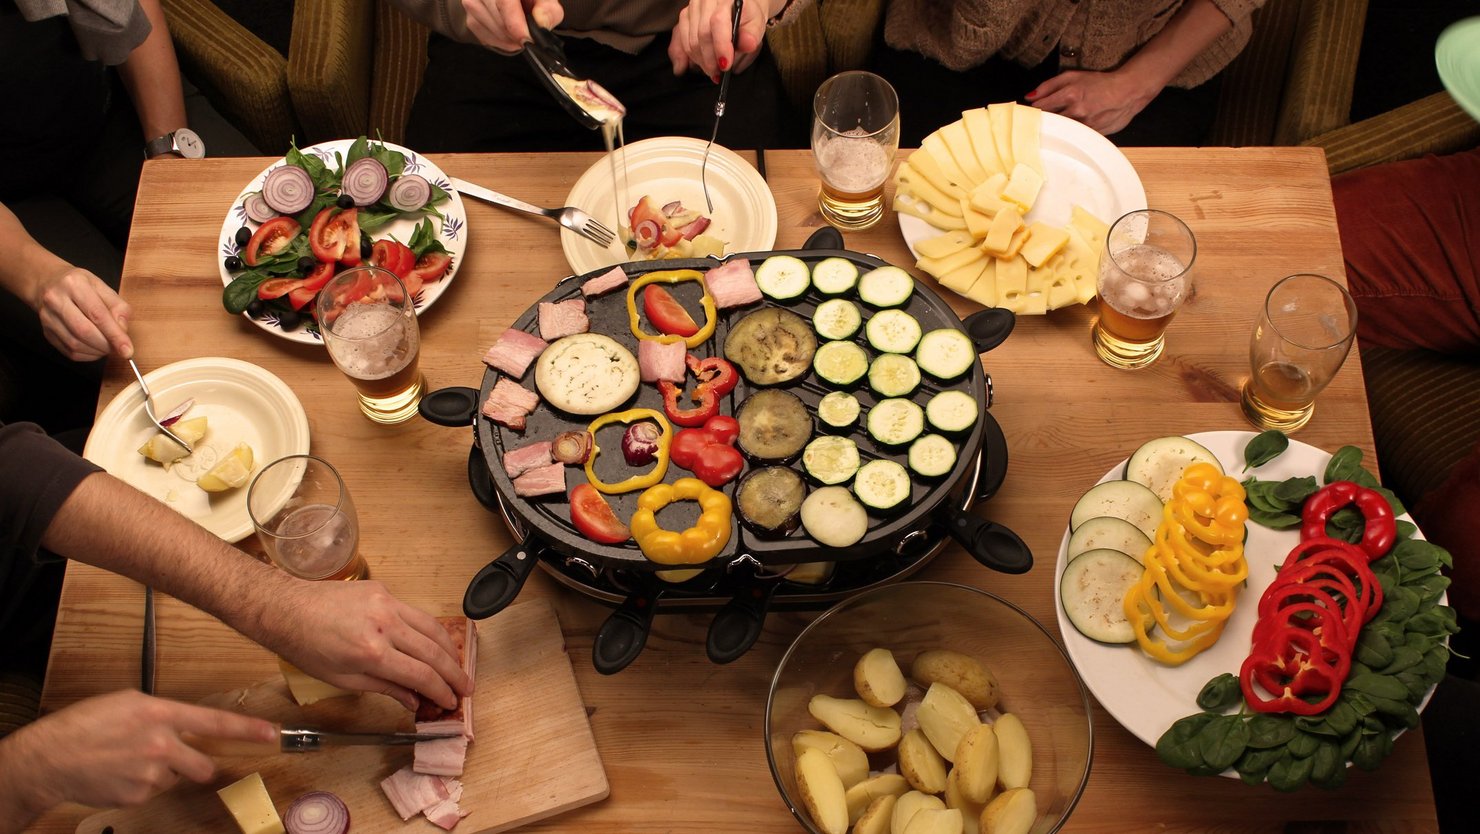 [Translate to PT (Portugal):] Table with raclette oven and dishes with potatoes, vegetables and cheese